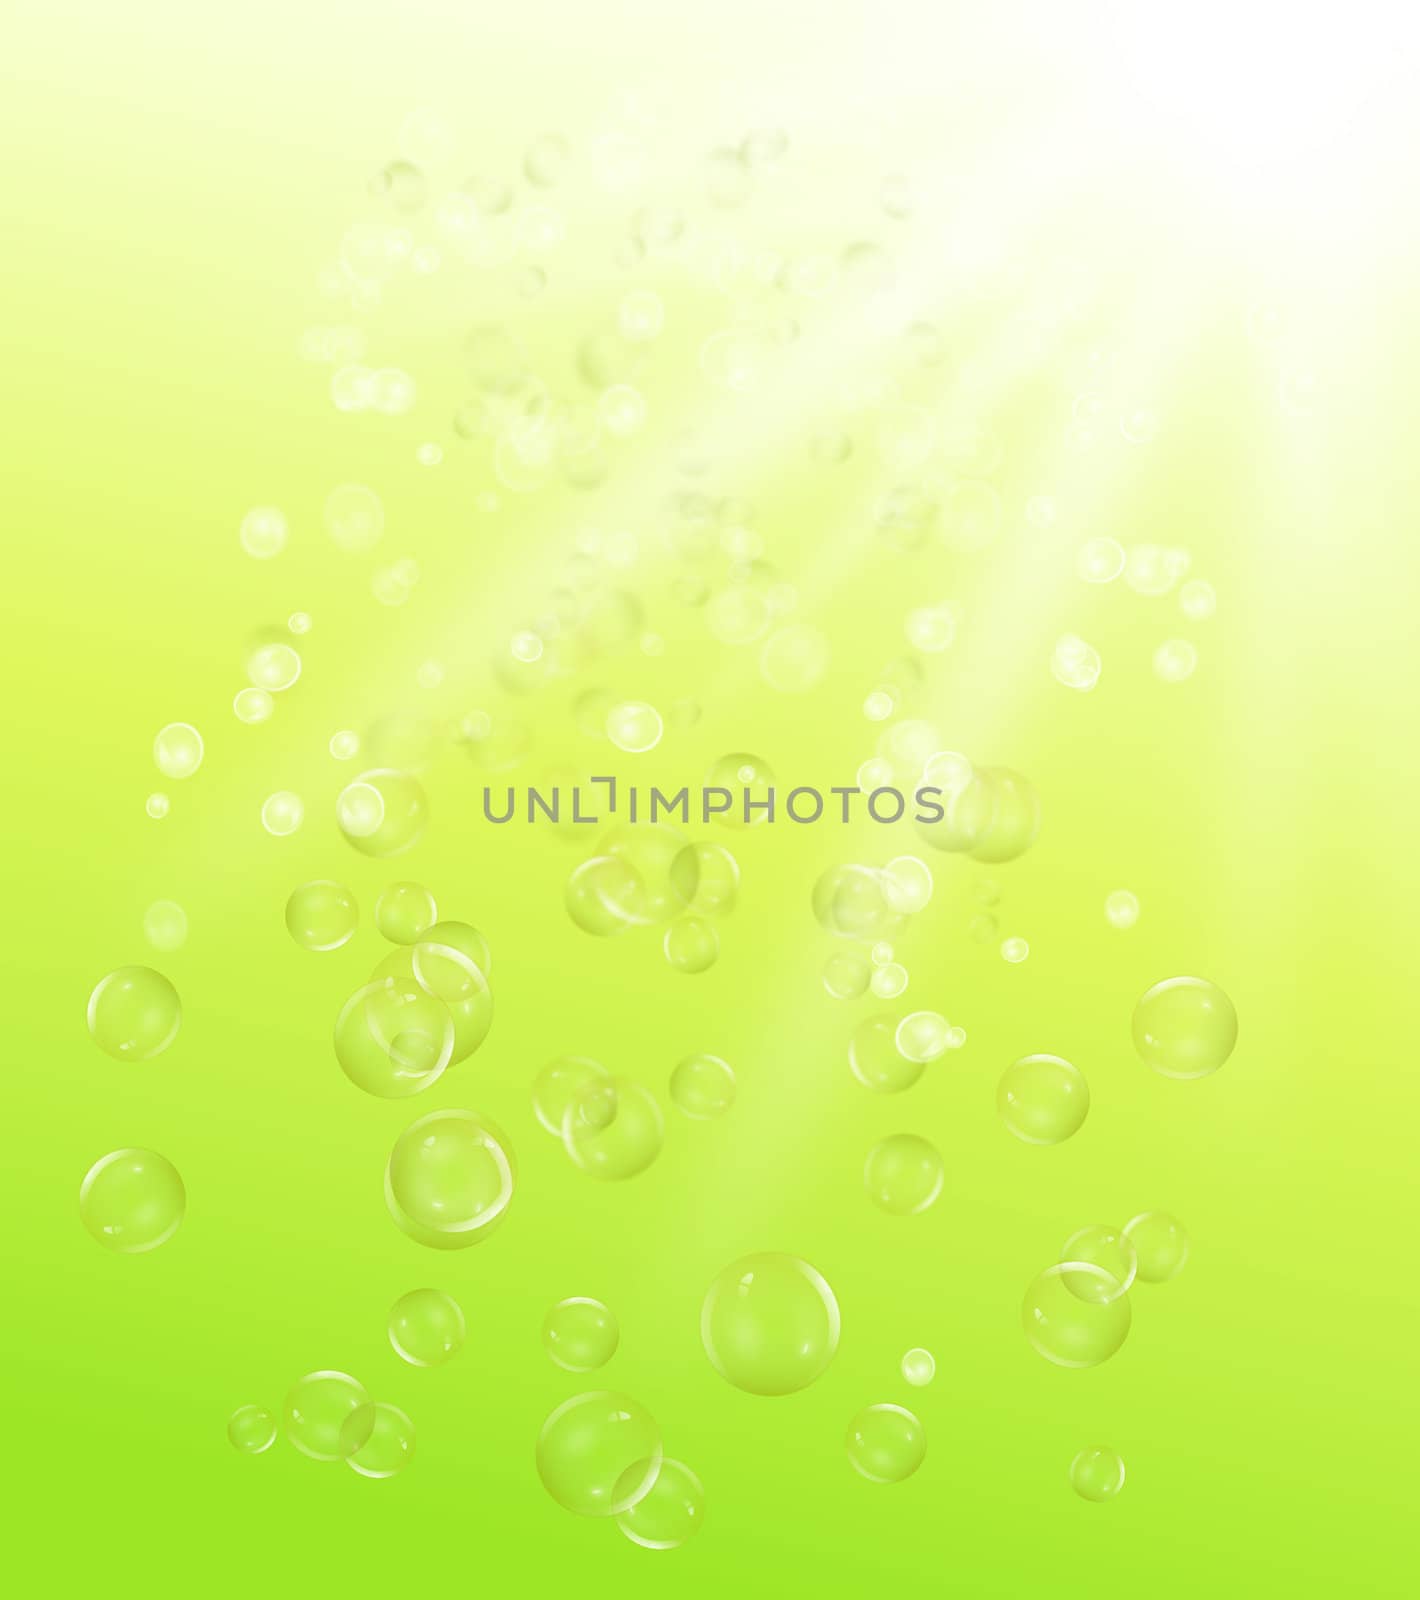 illustration depicting many air bubbles rising from the depths of a green body of water towards the surface.